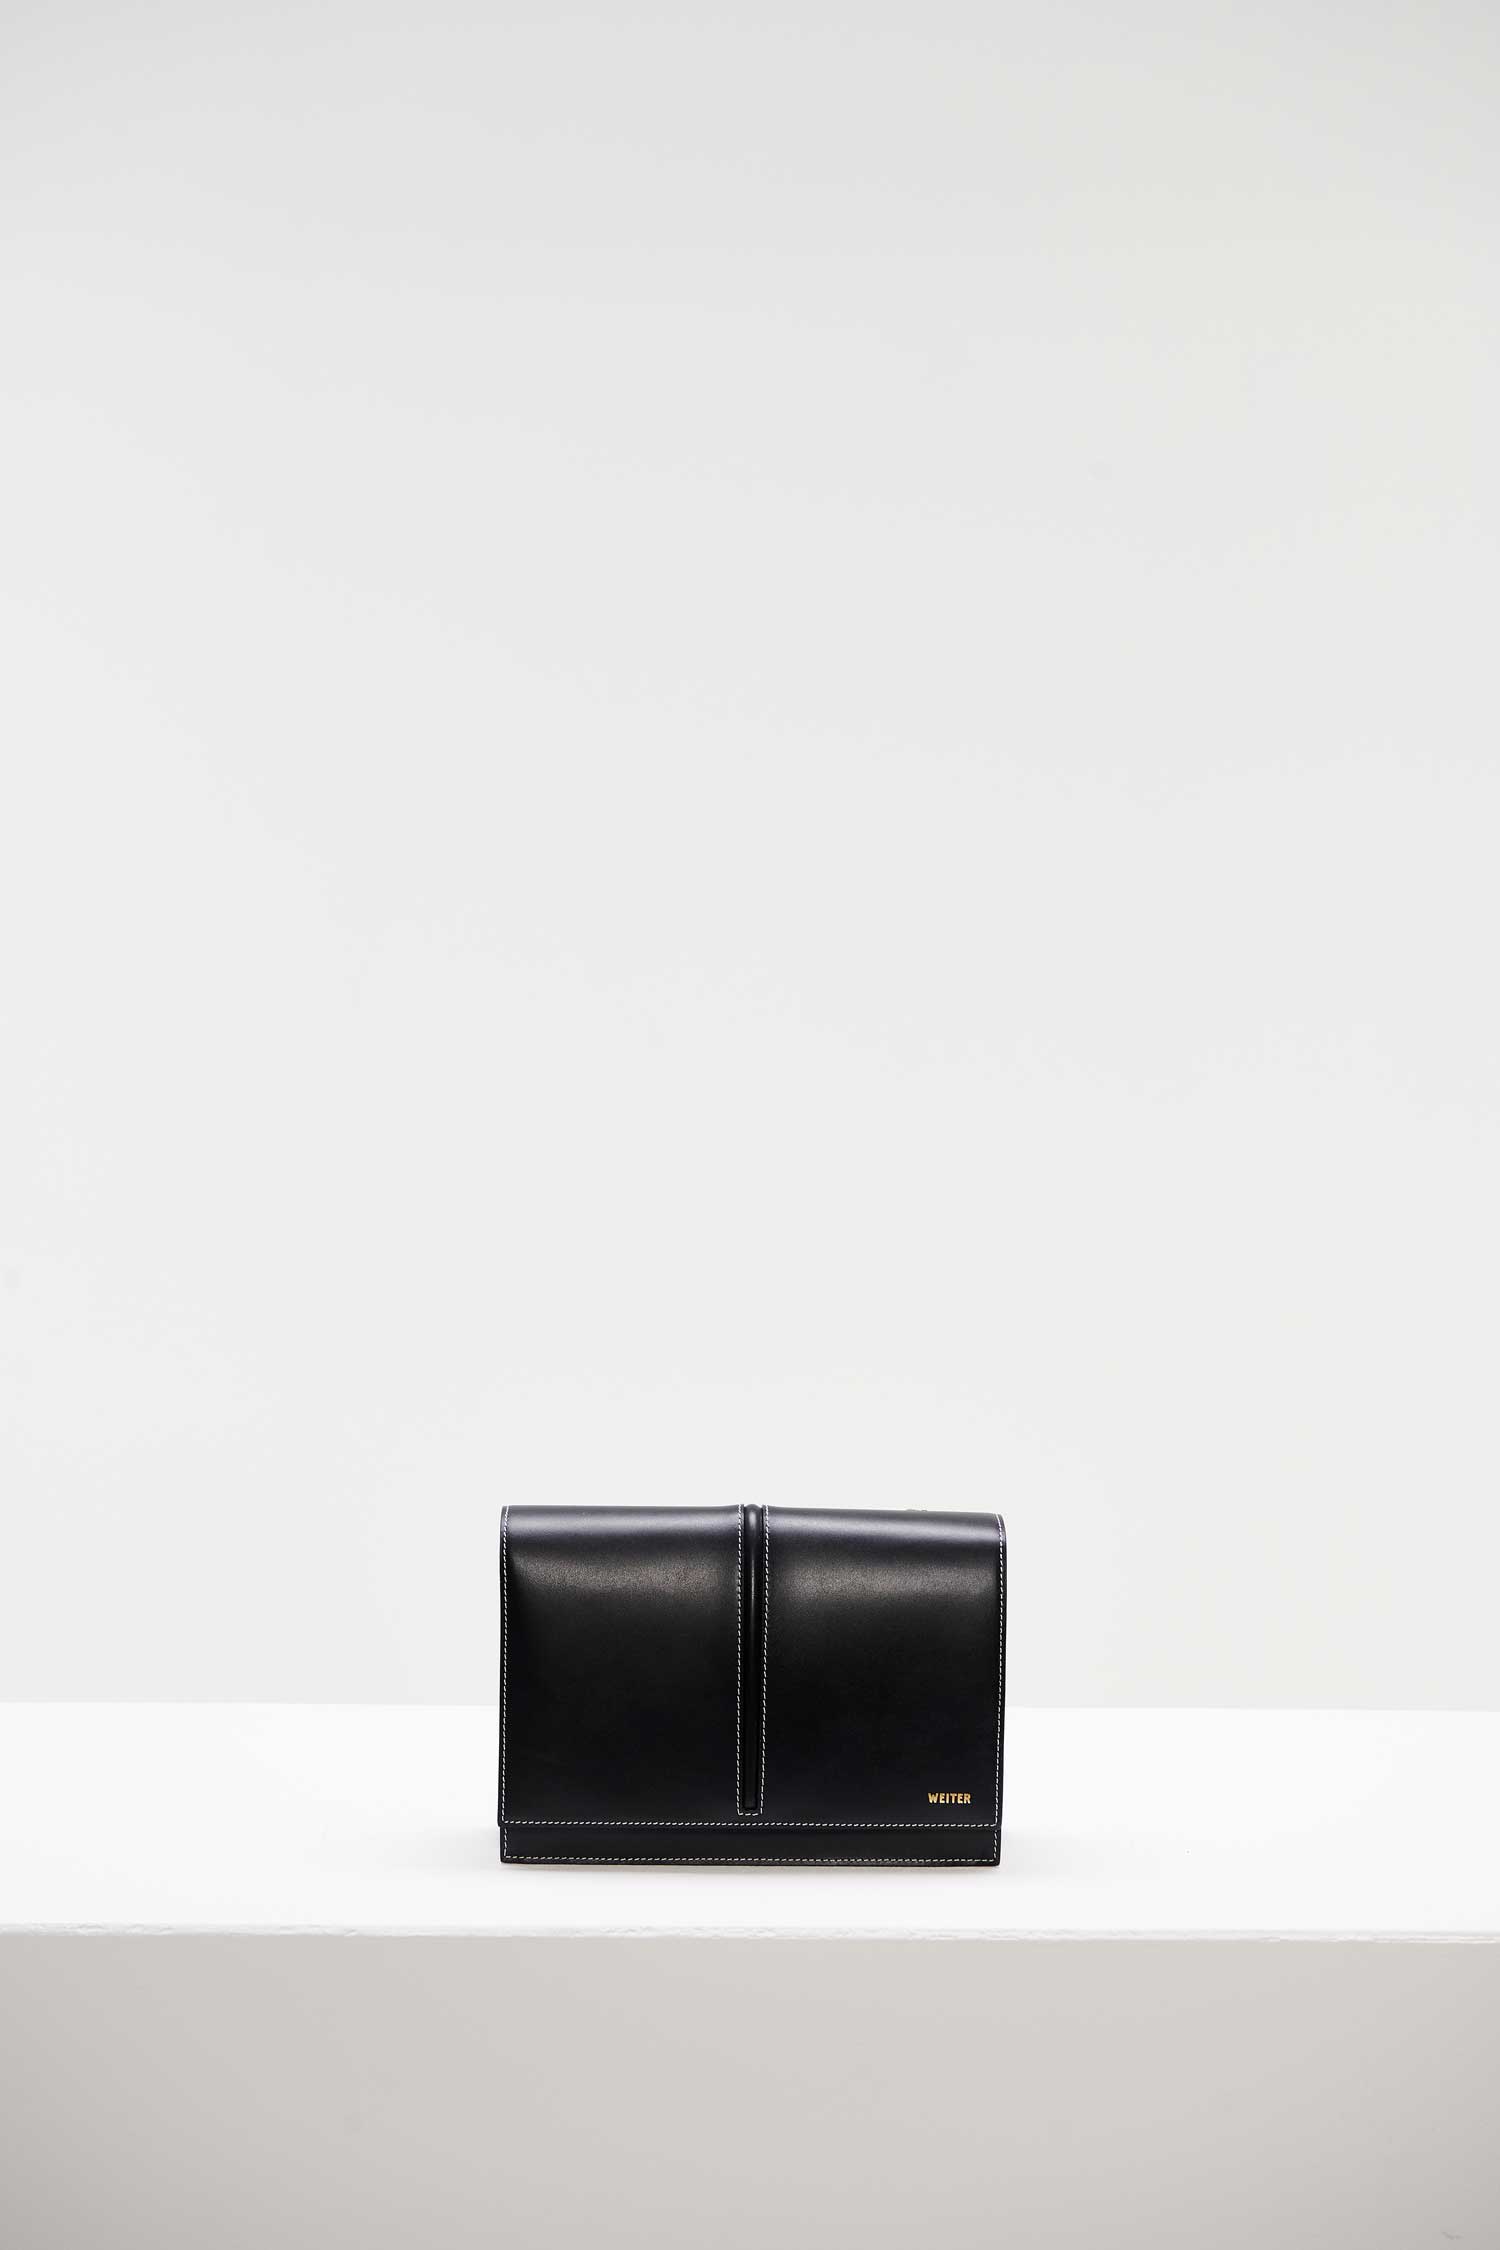 Weiter Bags – Daily Black – 2020